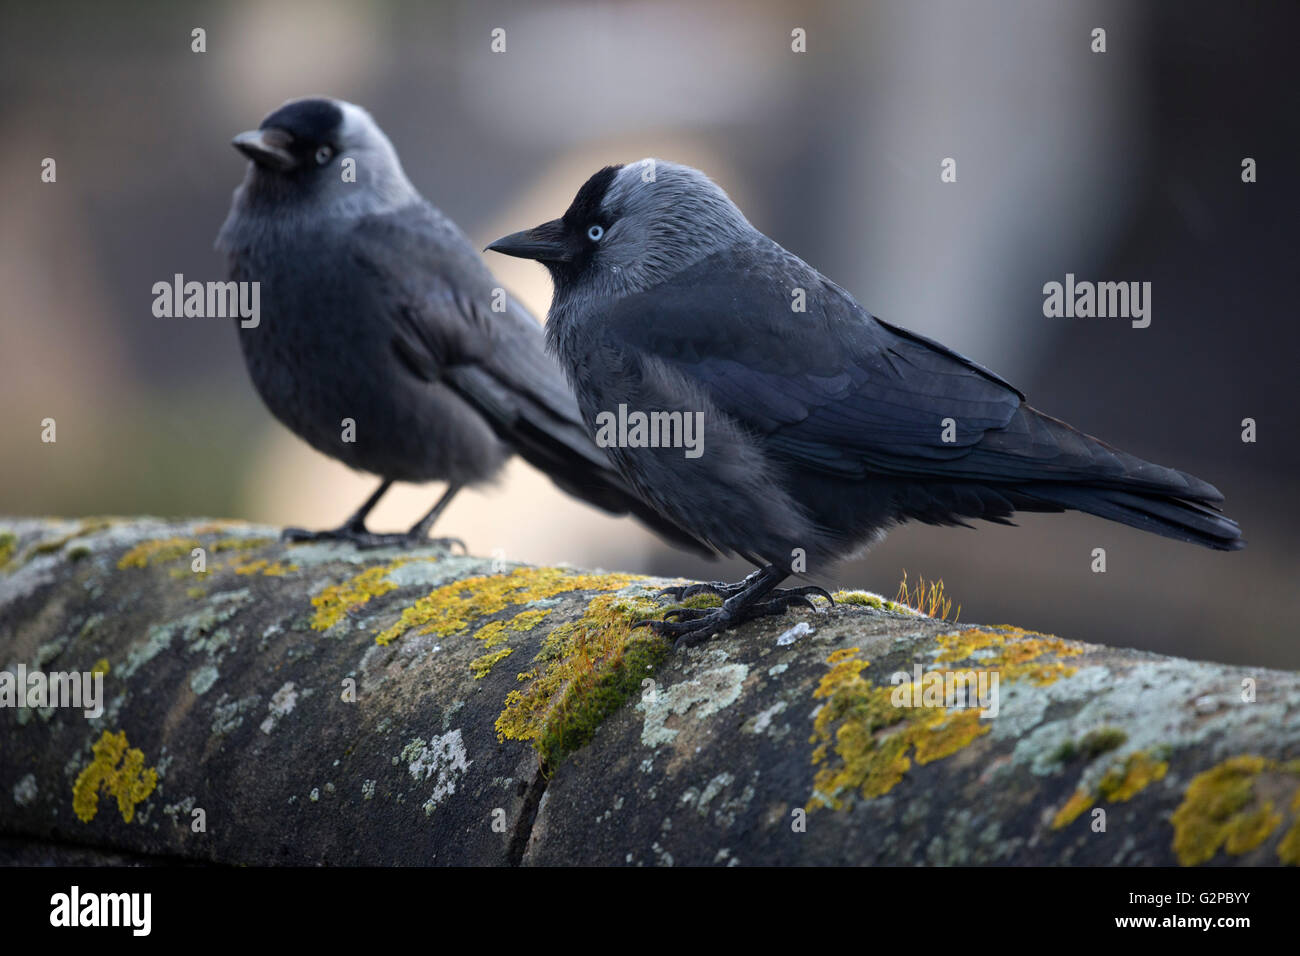 Pair of Jackdaws on rooftop, Chipping Campden, Cotswolds, Gloucestershire, England, United Kingdom, Europe Stock Photo